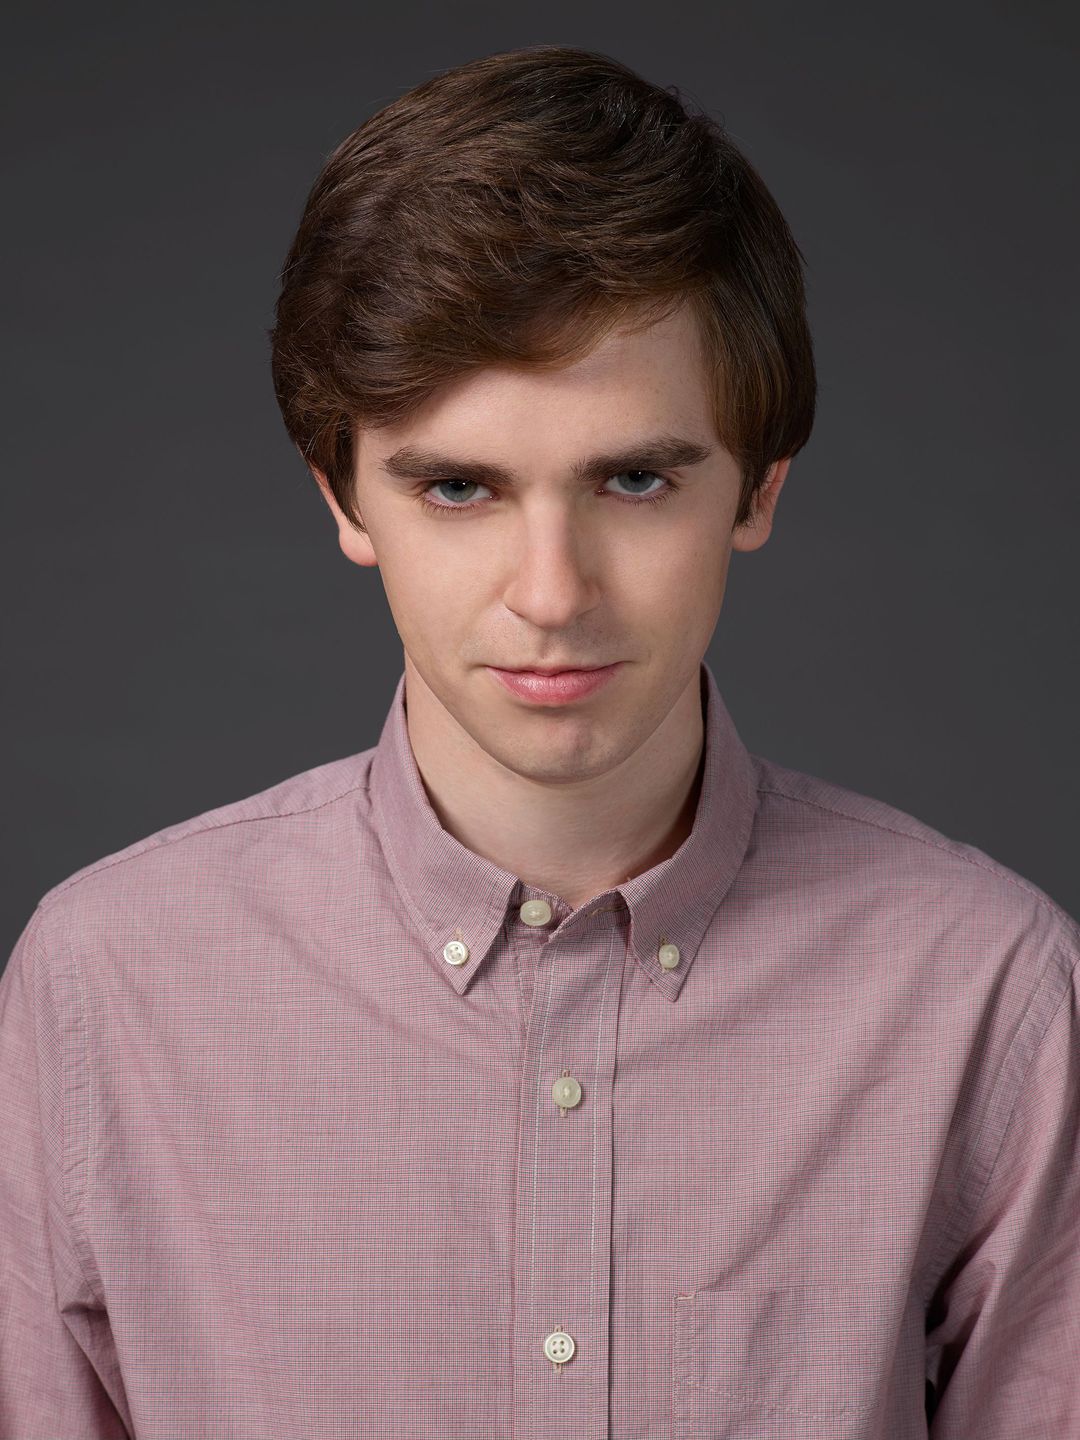 Freddie Highmore how did he became famous